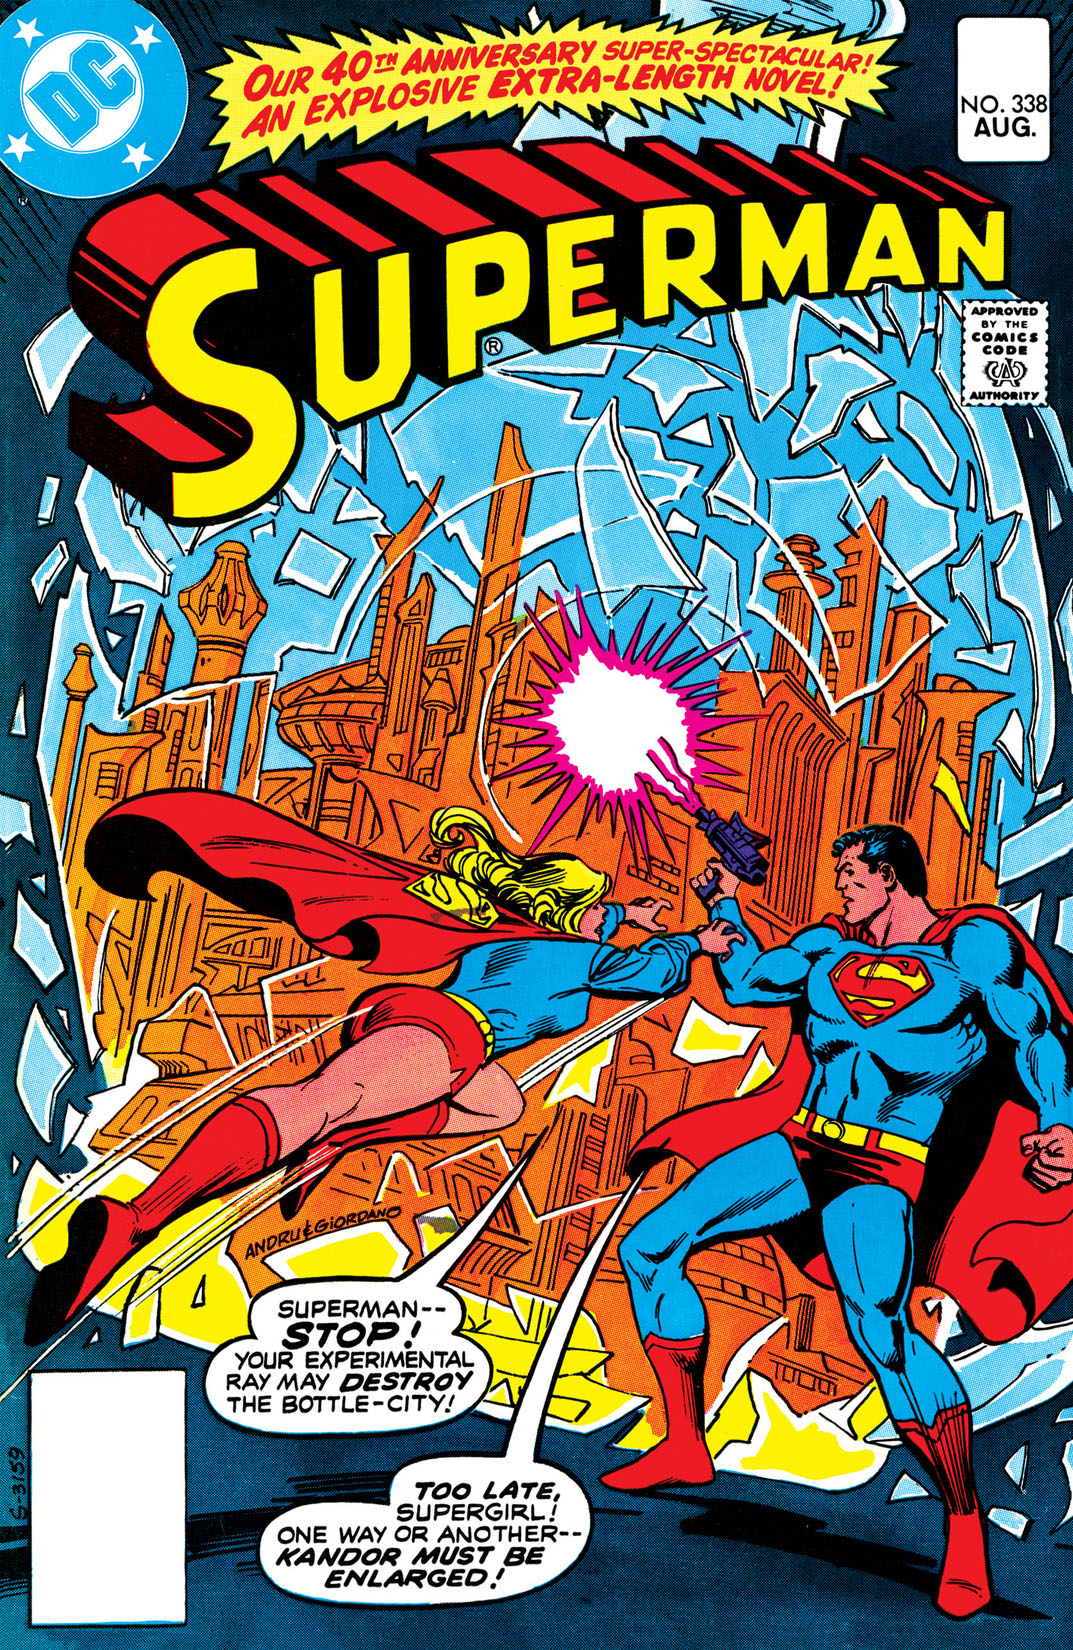 Superman (1939-) #338 preview images